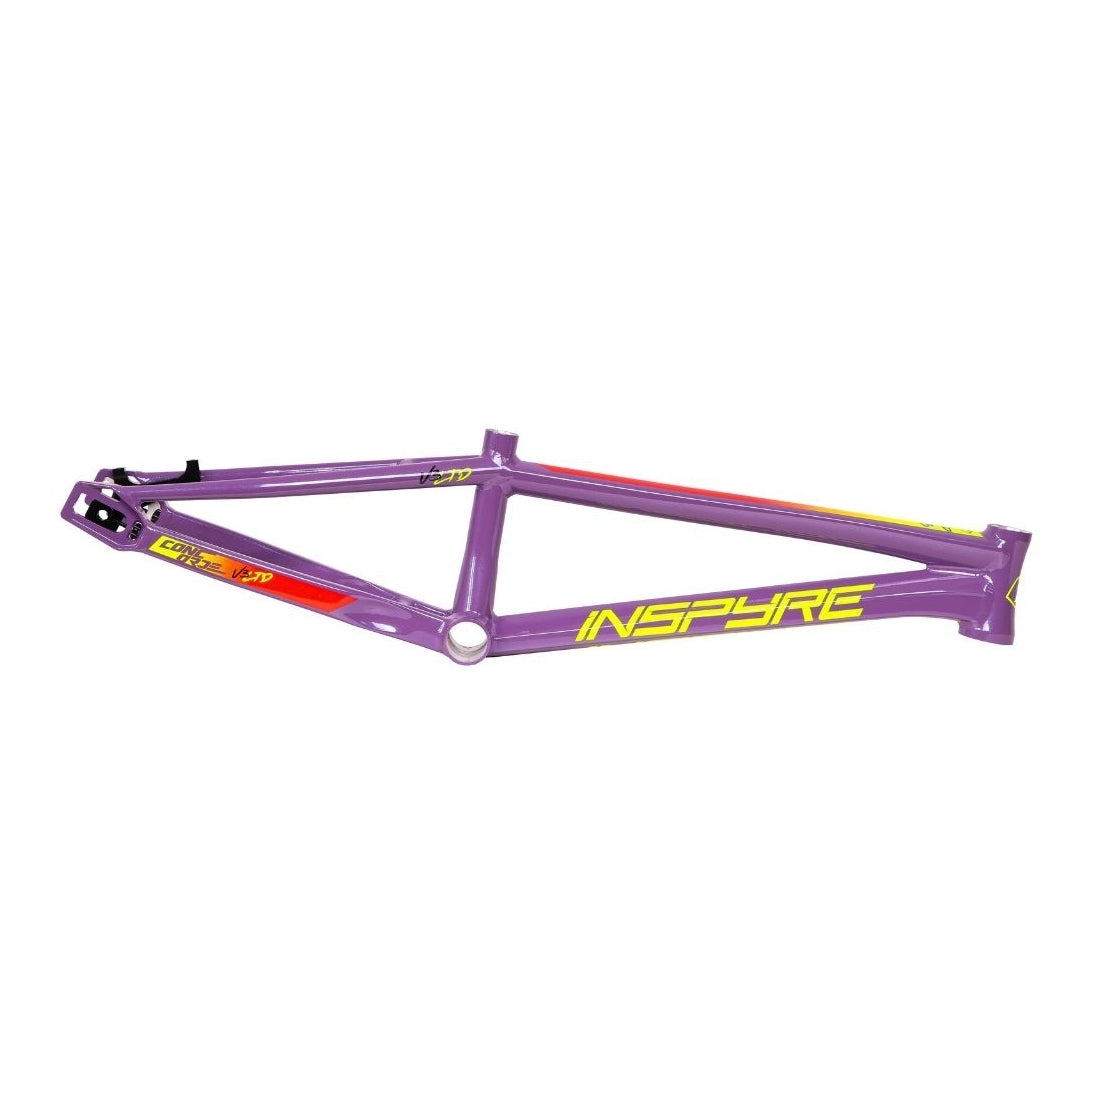 Purple and yellow Inspyre Concorde V3 Junior Frame BMX race bike frame isolated on a white background.